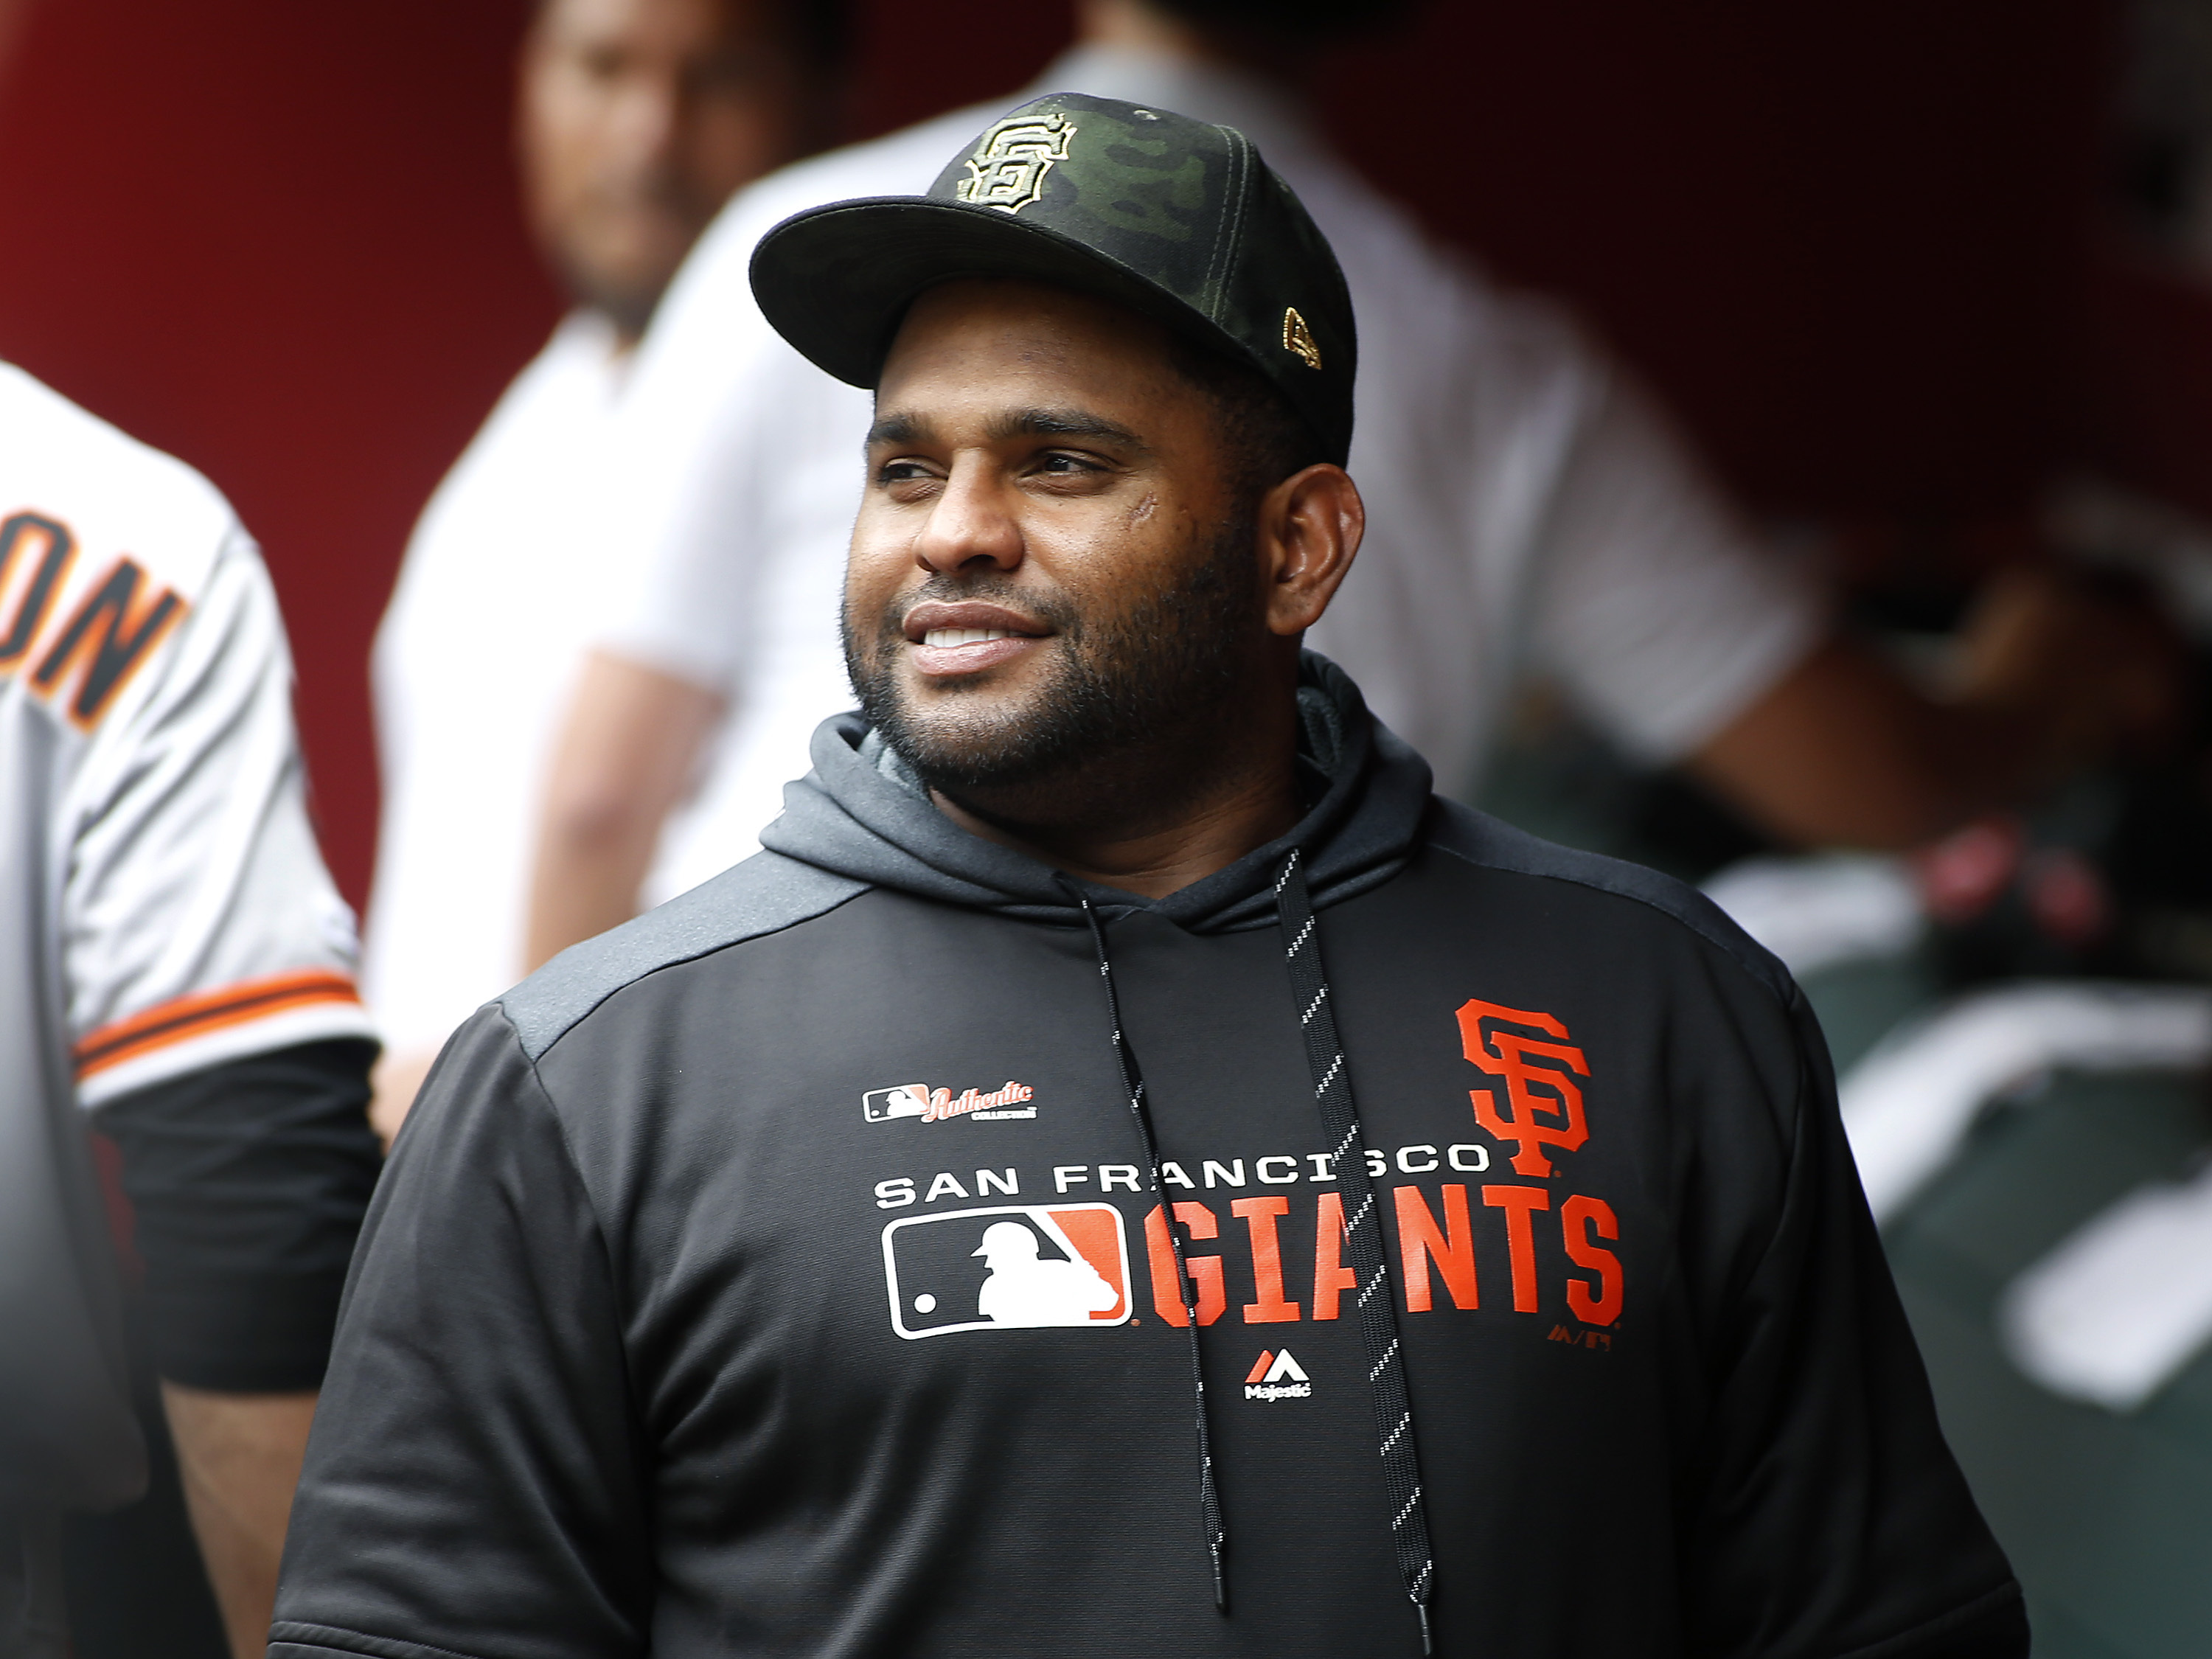 A look at the career of Pablo Sandoval